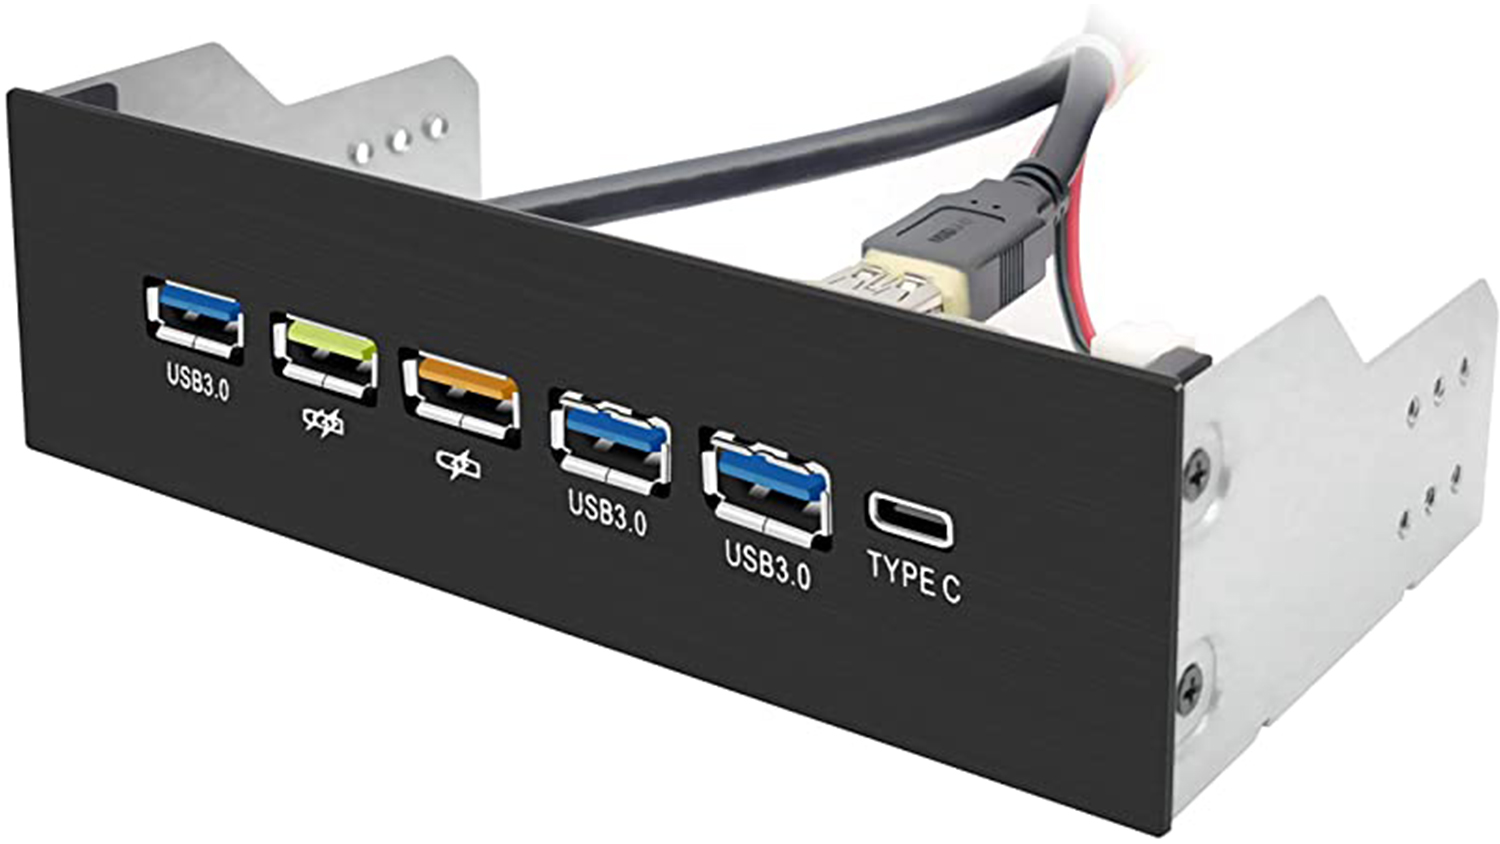 ports and connections